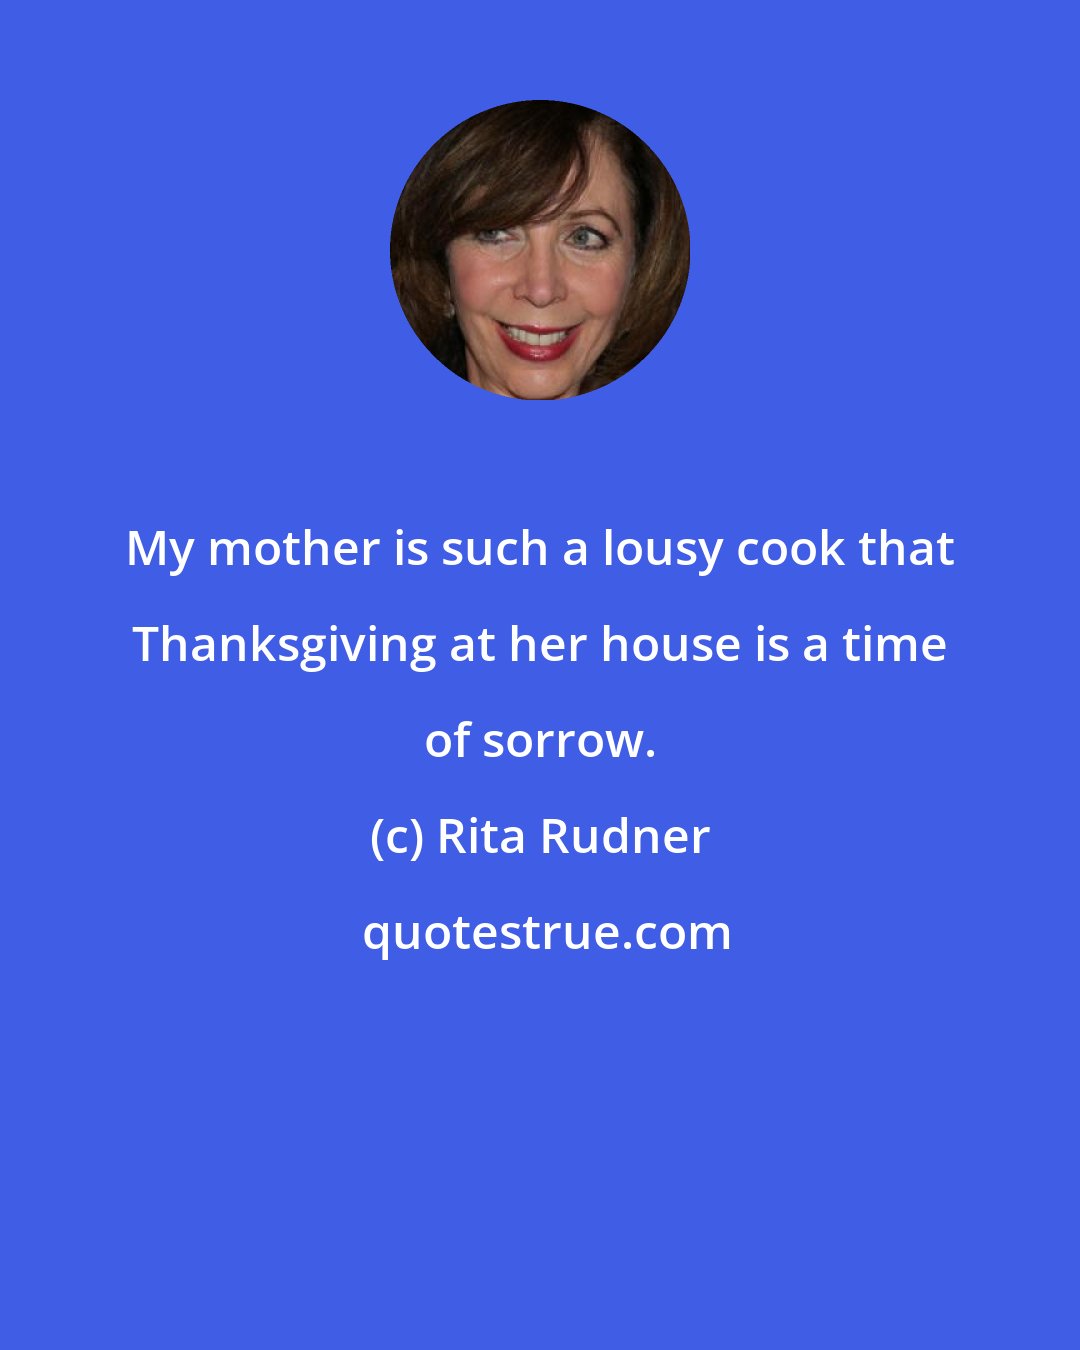 Rita Rudner: My mother is such a lousy cook that Thanksgiving at her house is a time of sorrow.